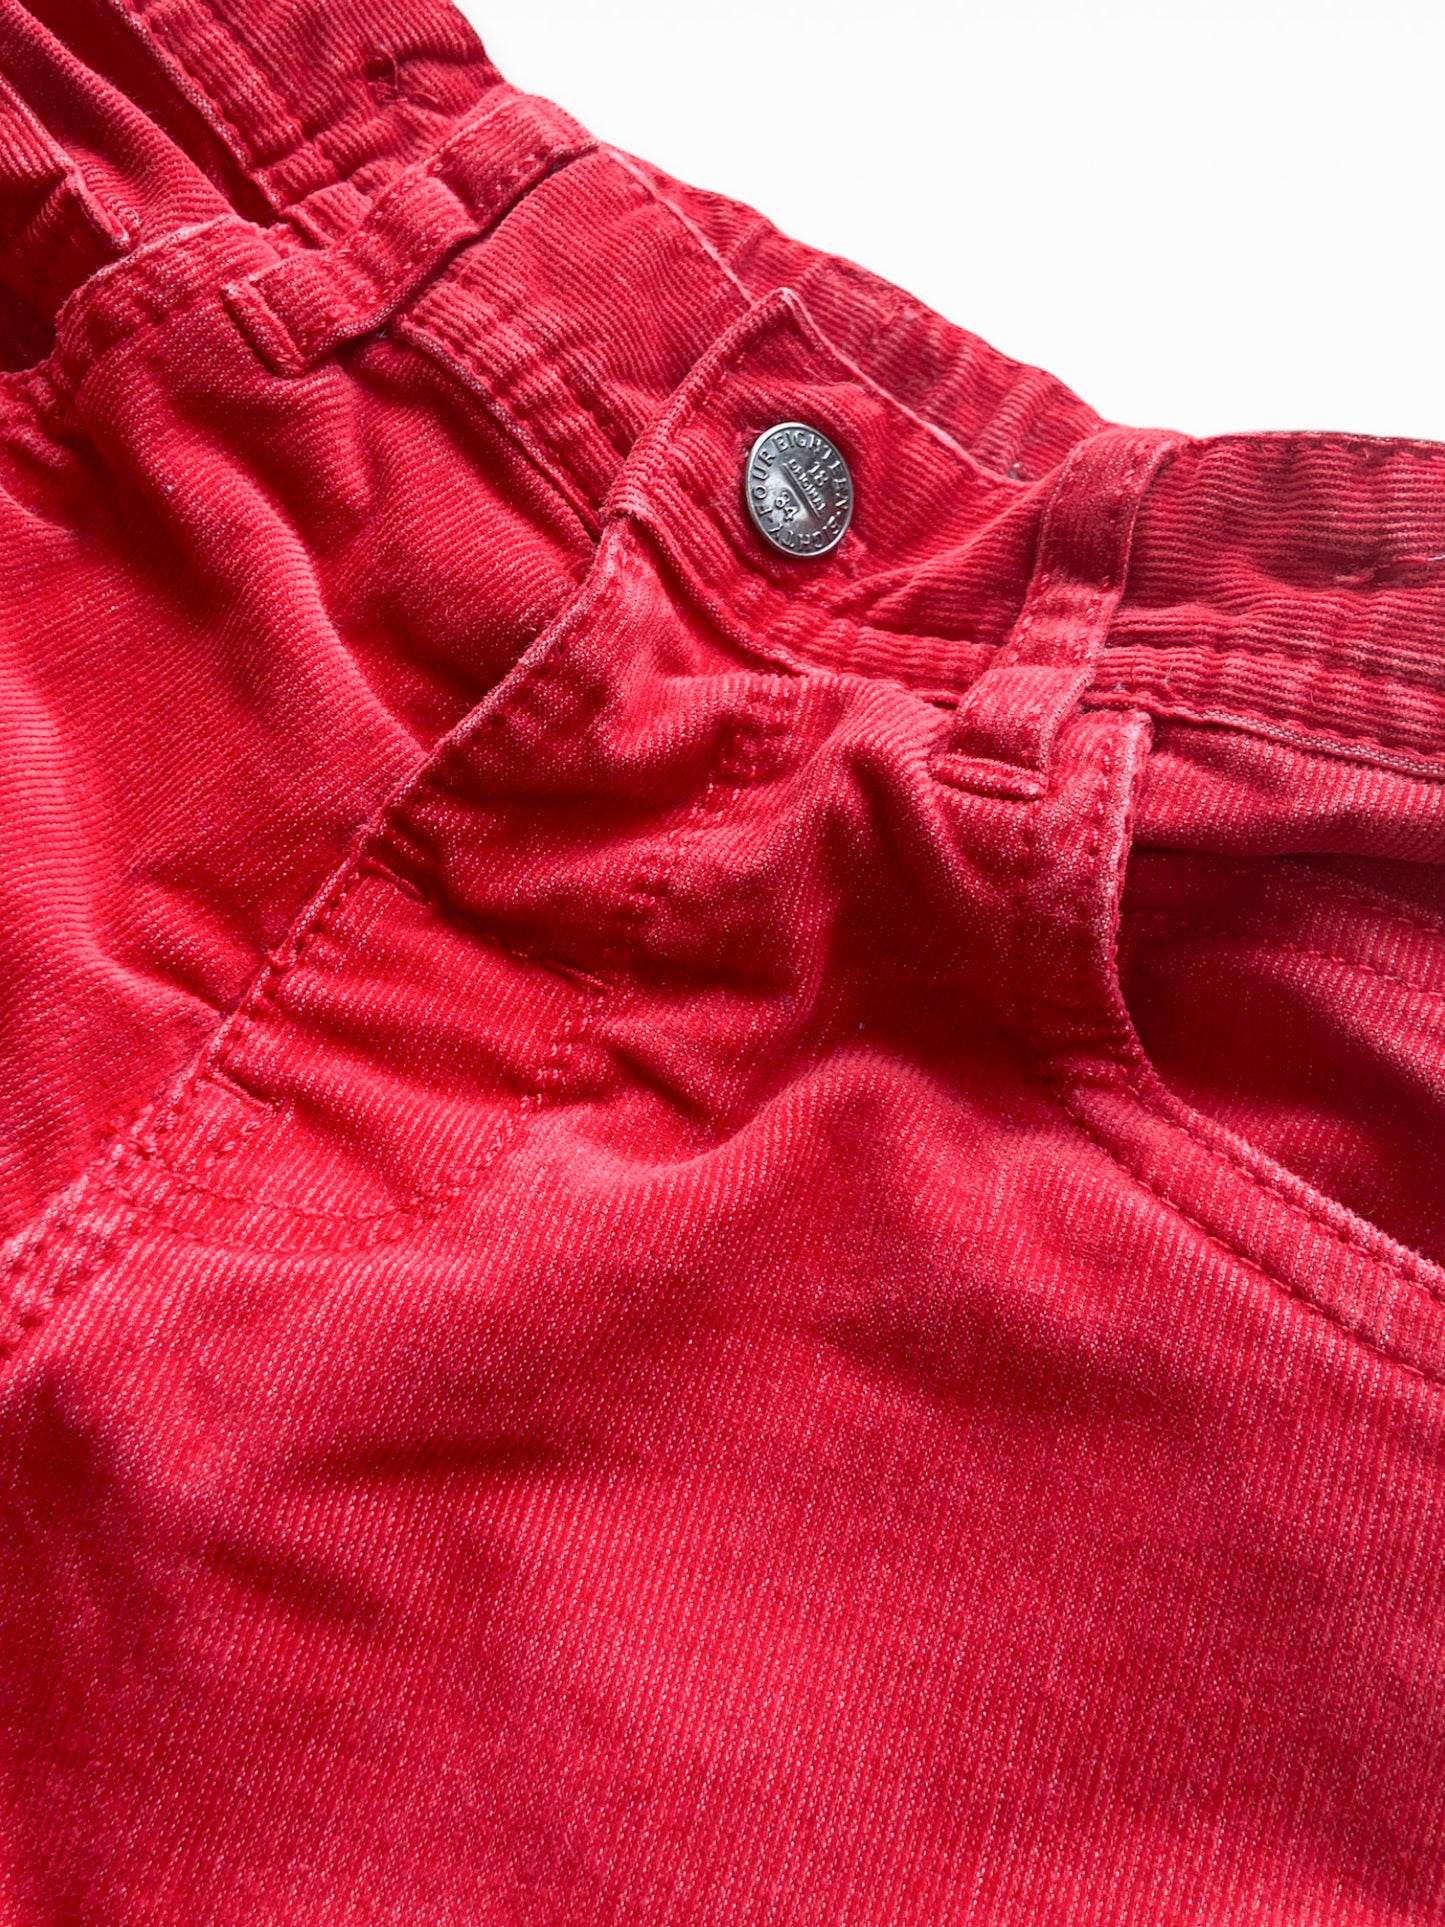 3-4 Y Red cord trousers